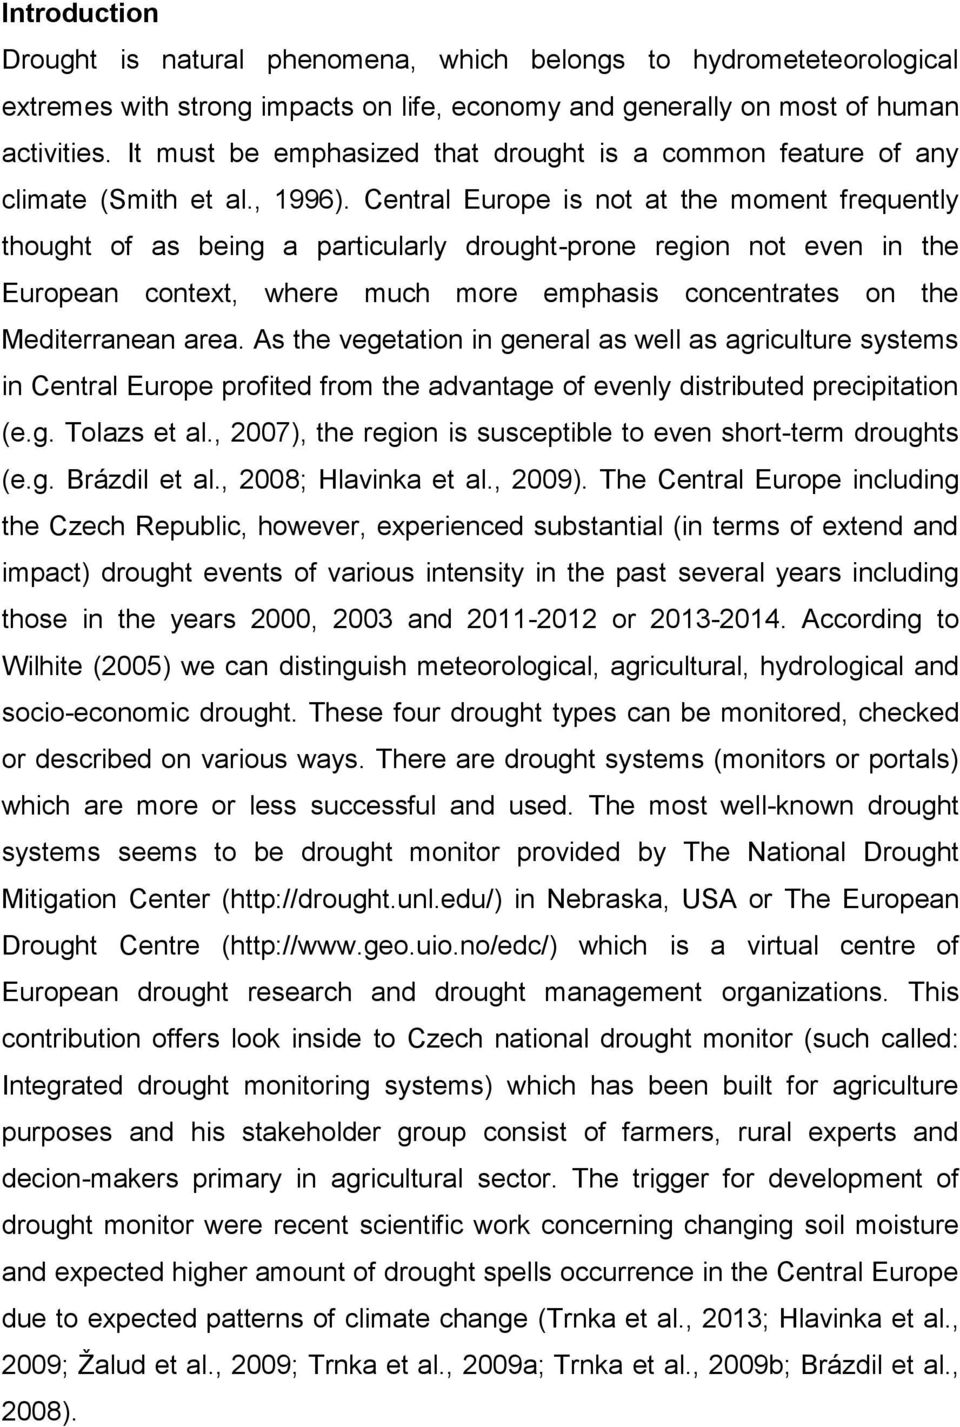 Central Europe is not at the moment frequently thought of as being a particularly drought-prone region not even in the European context, where much more emphasis concentrates on the Mediterranean